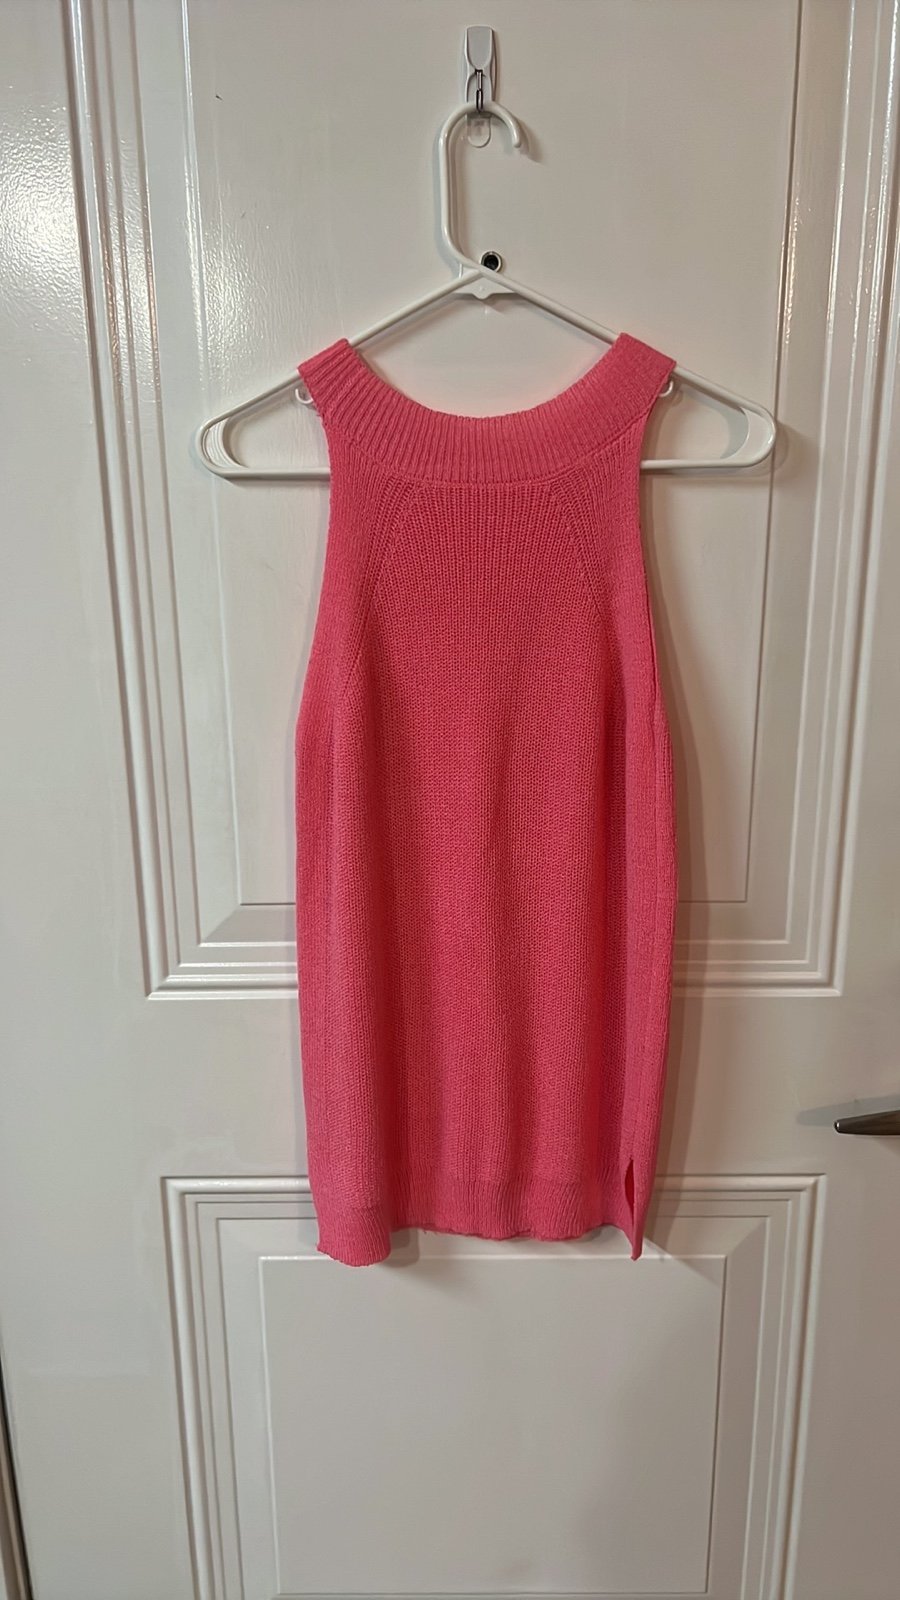 the Lowest price Bright Pink sweater tank. Size M from Amazon OyULGuLWw Factory Price